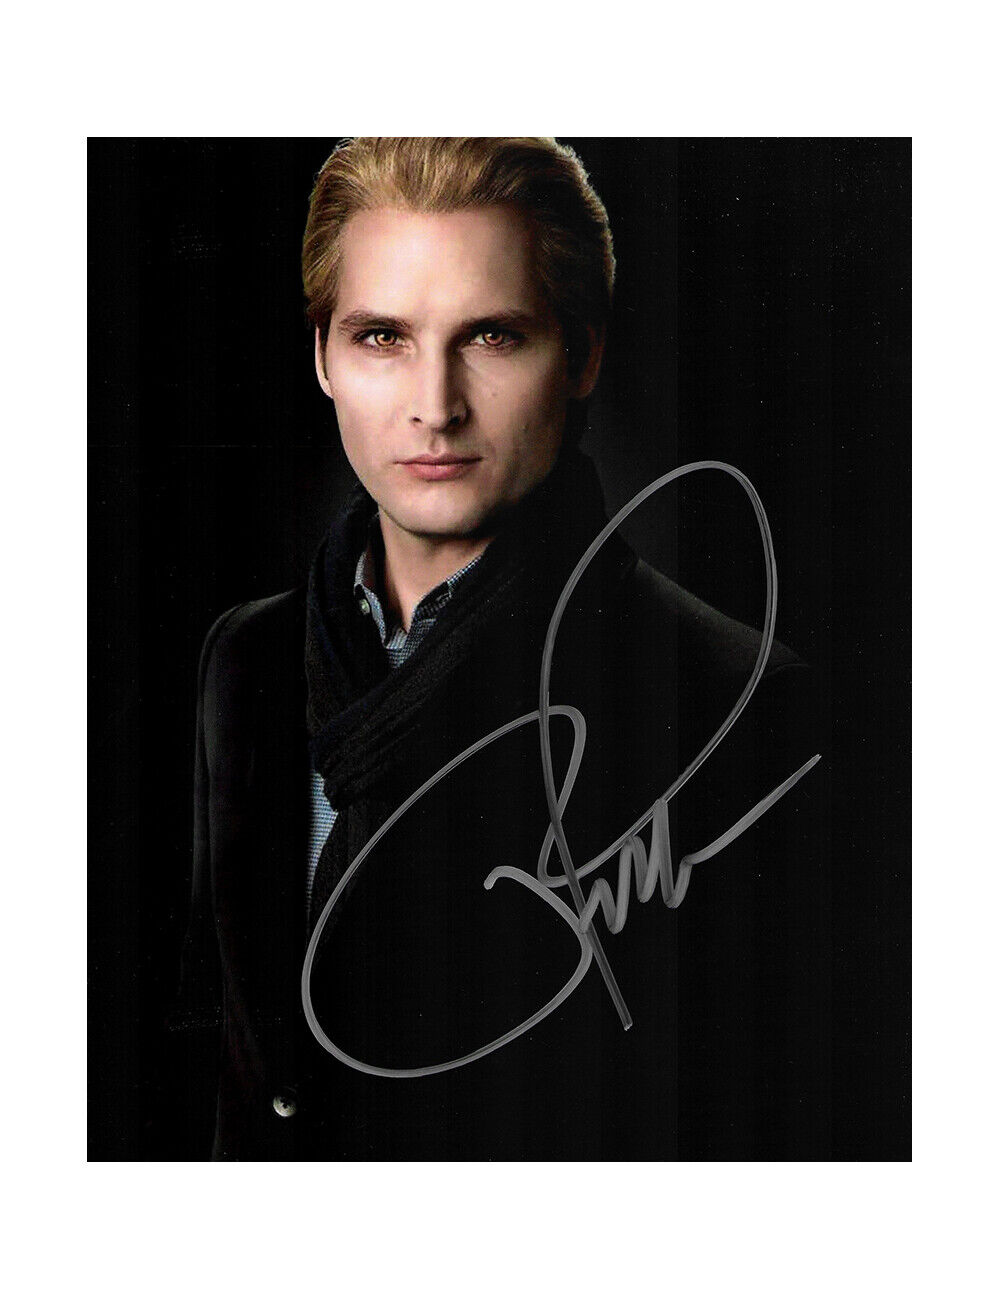 8x10 Twilight Print Signed by Peter Facinelli 100% Authentic With COA